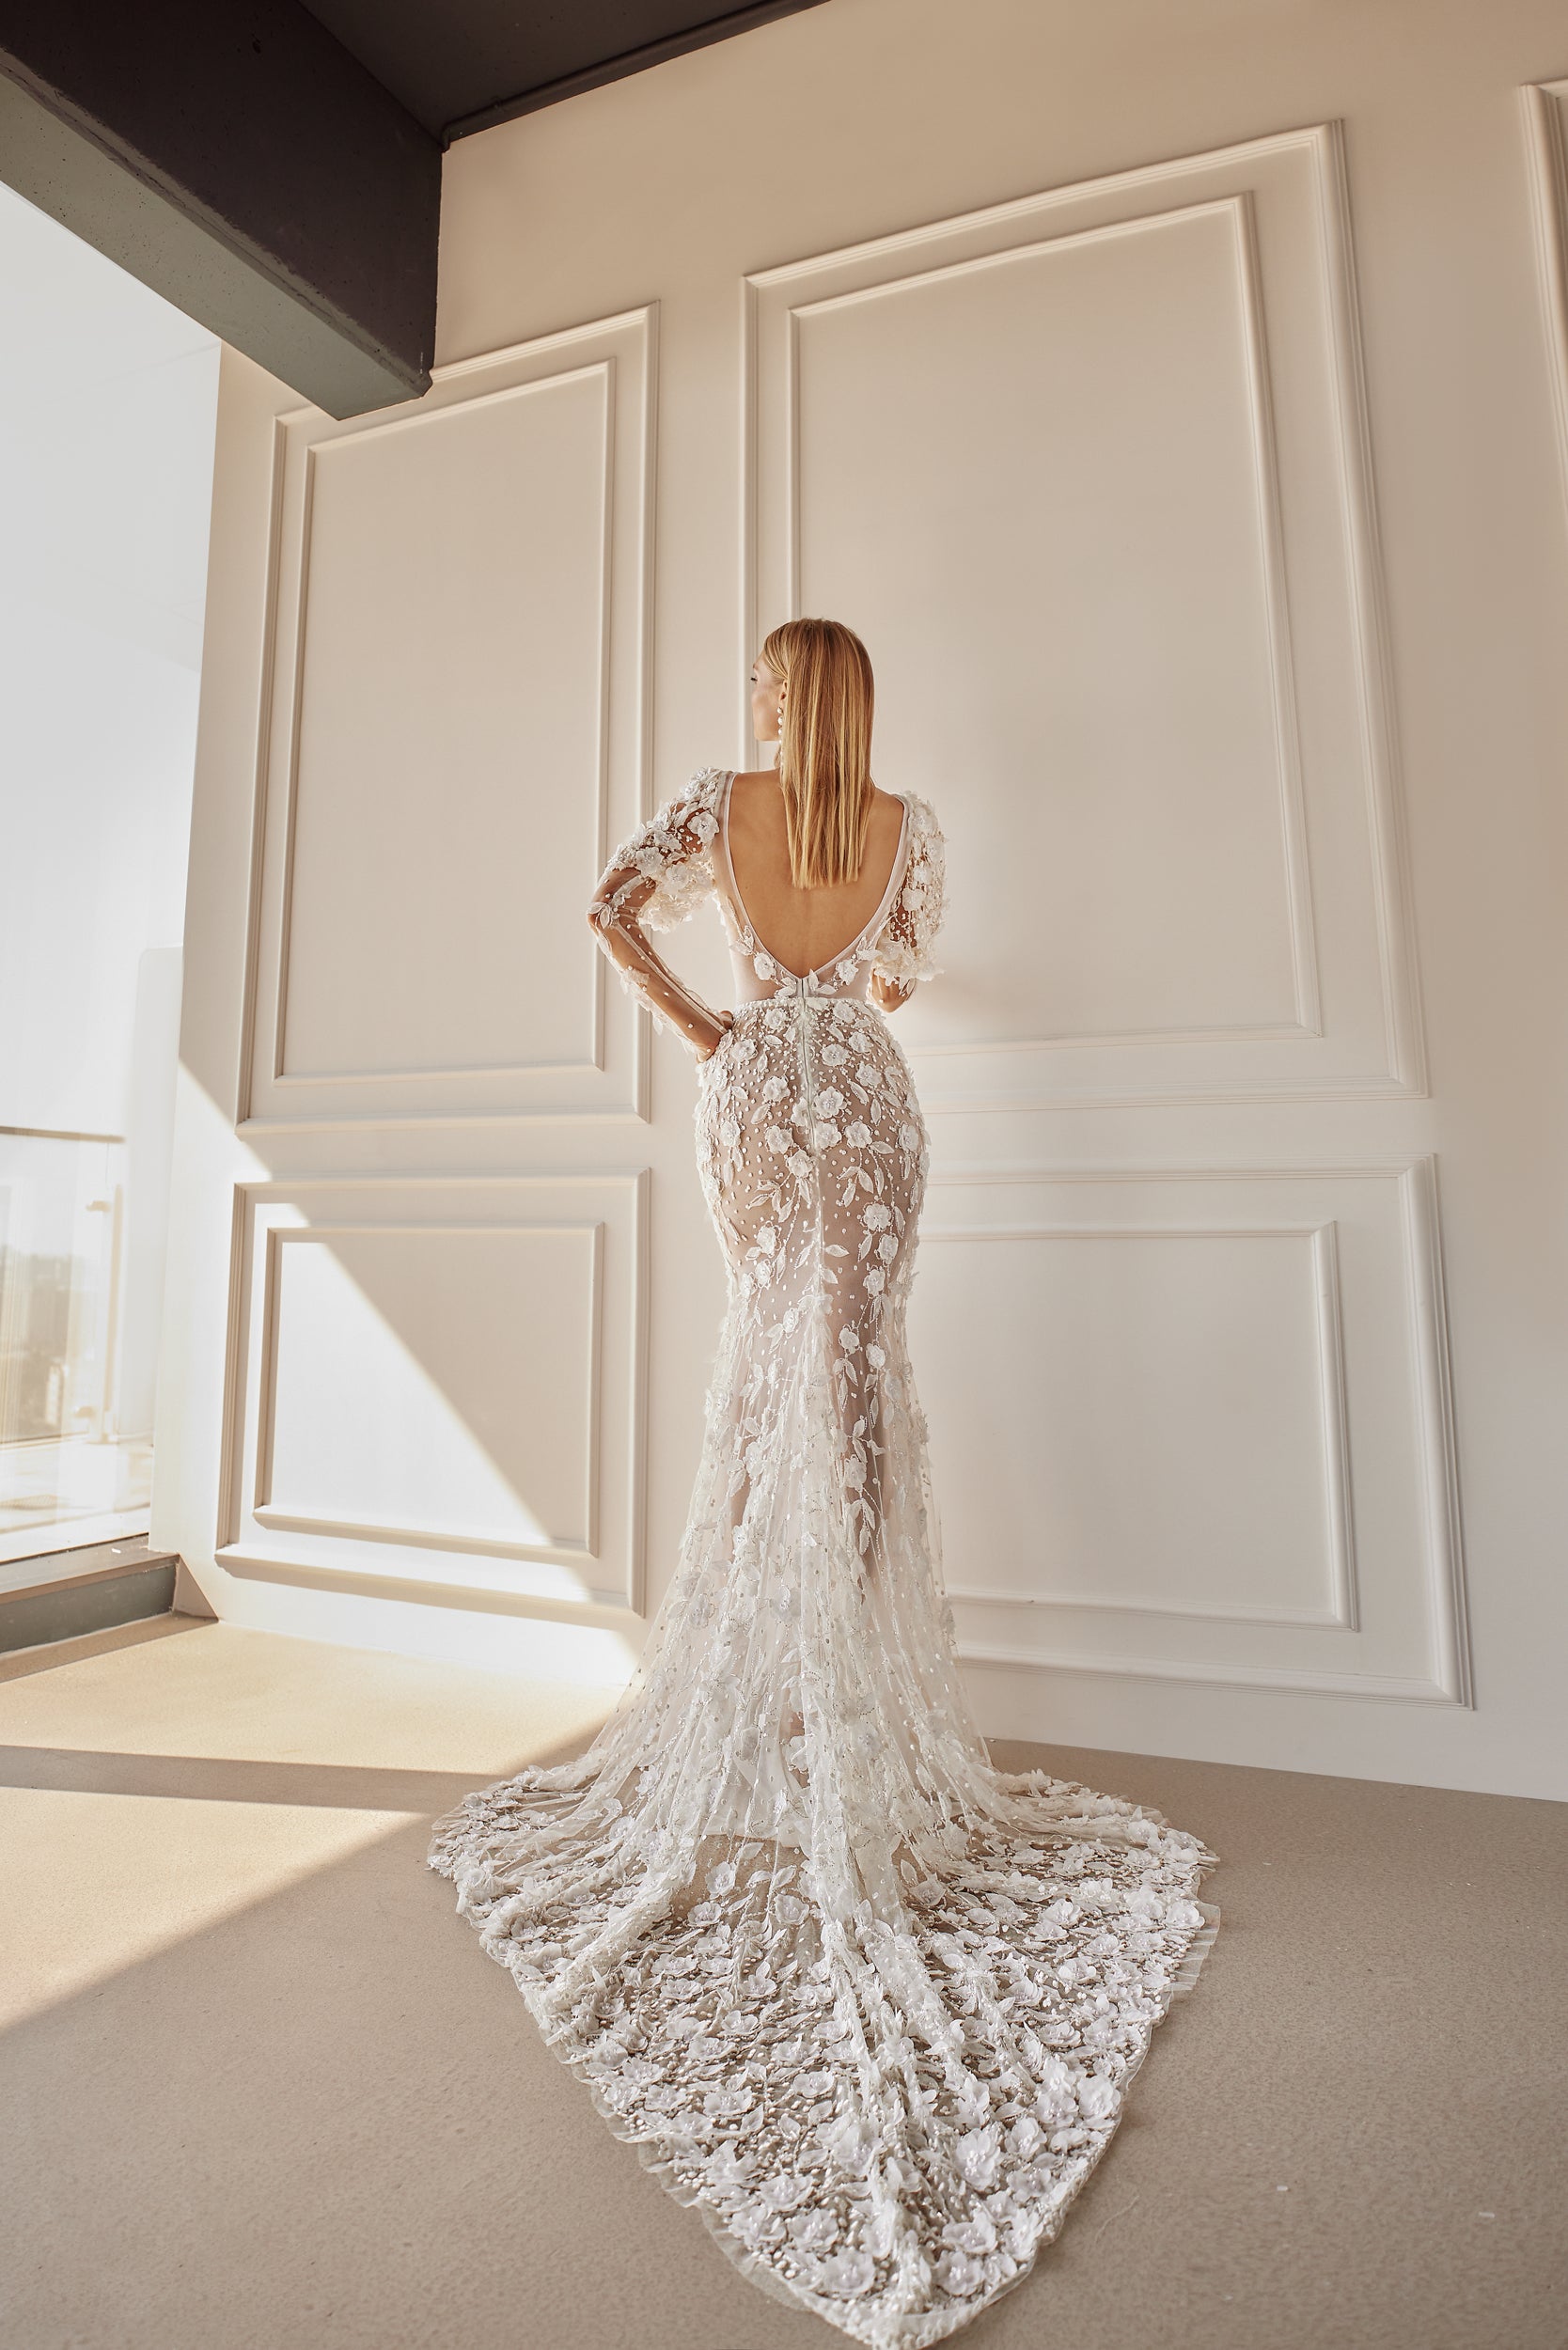 Illusion Long Sleeve Fit-and-Flare Gown With Florals And Pearls by Tal Kedem Bridal Couture - Image 2